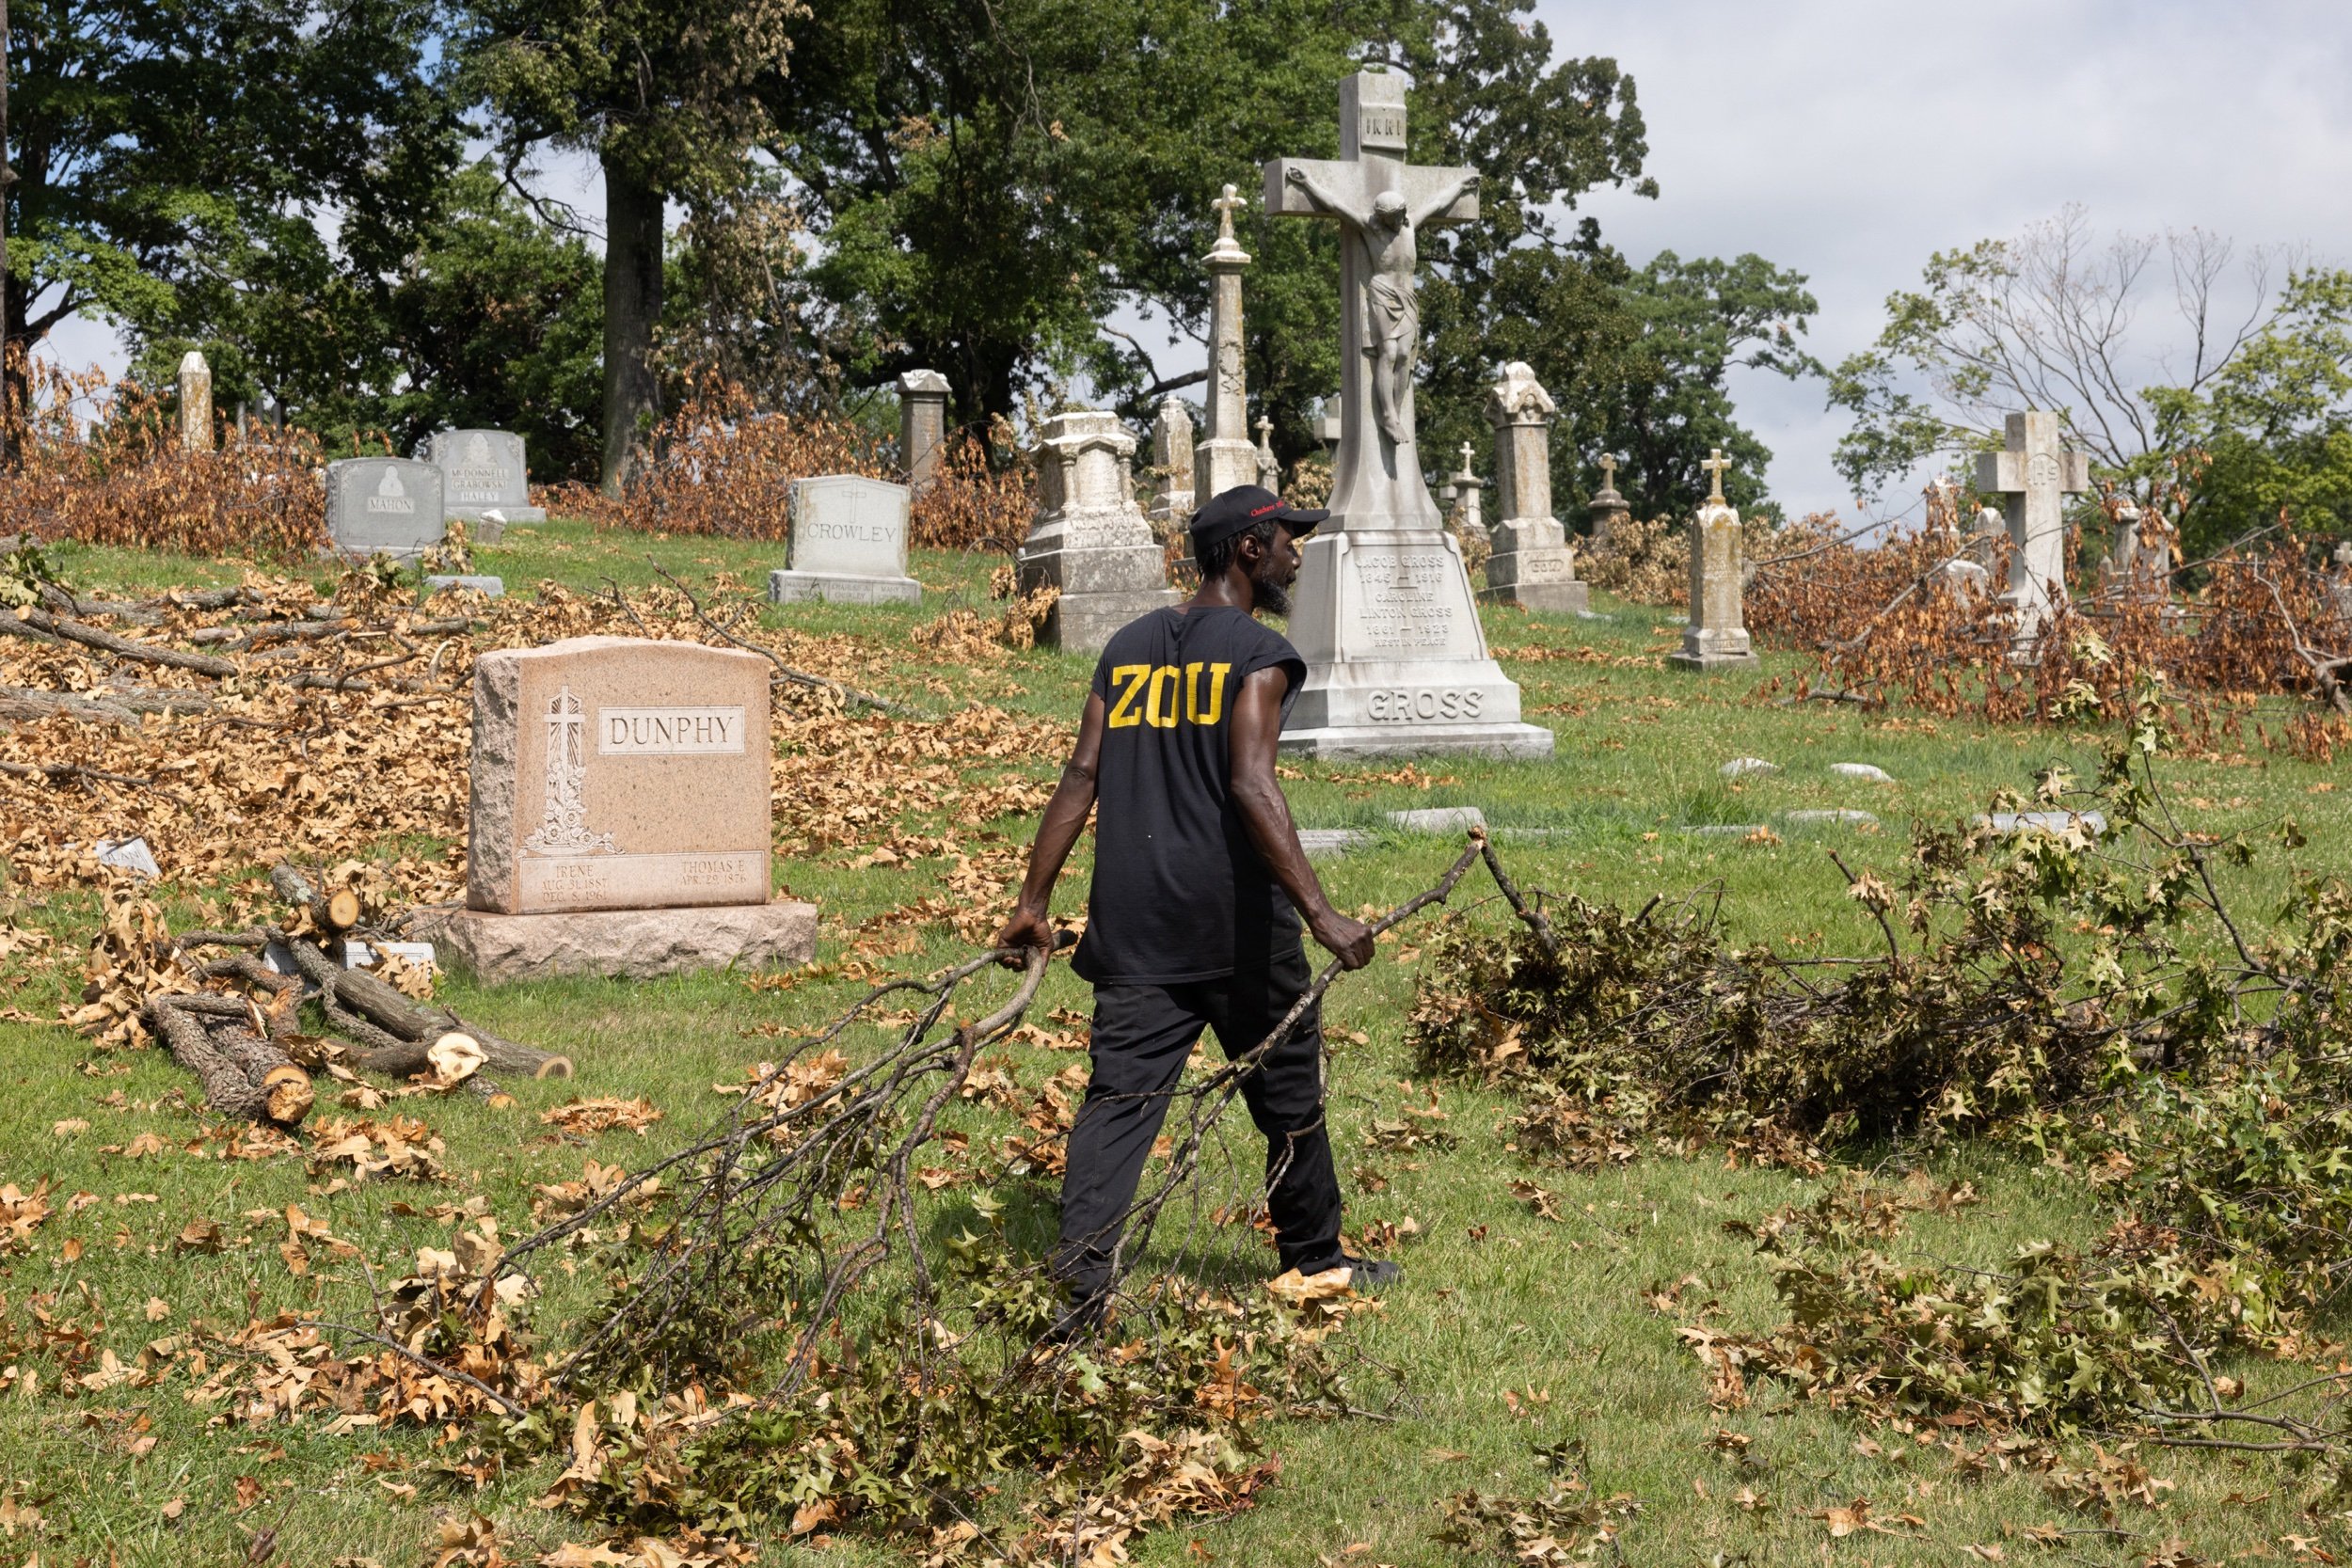  Daniel Tyler of St. Louis cleared debris from storm damage July 13 at Calvary Cemetery in St. Louis. The cemetery was damaged during storms the weekend of July 1 and is currently closed to the public due to the damage. 